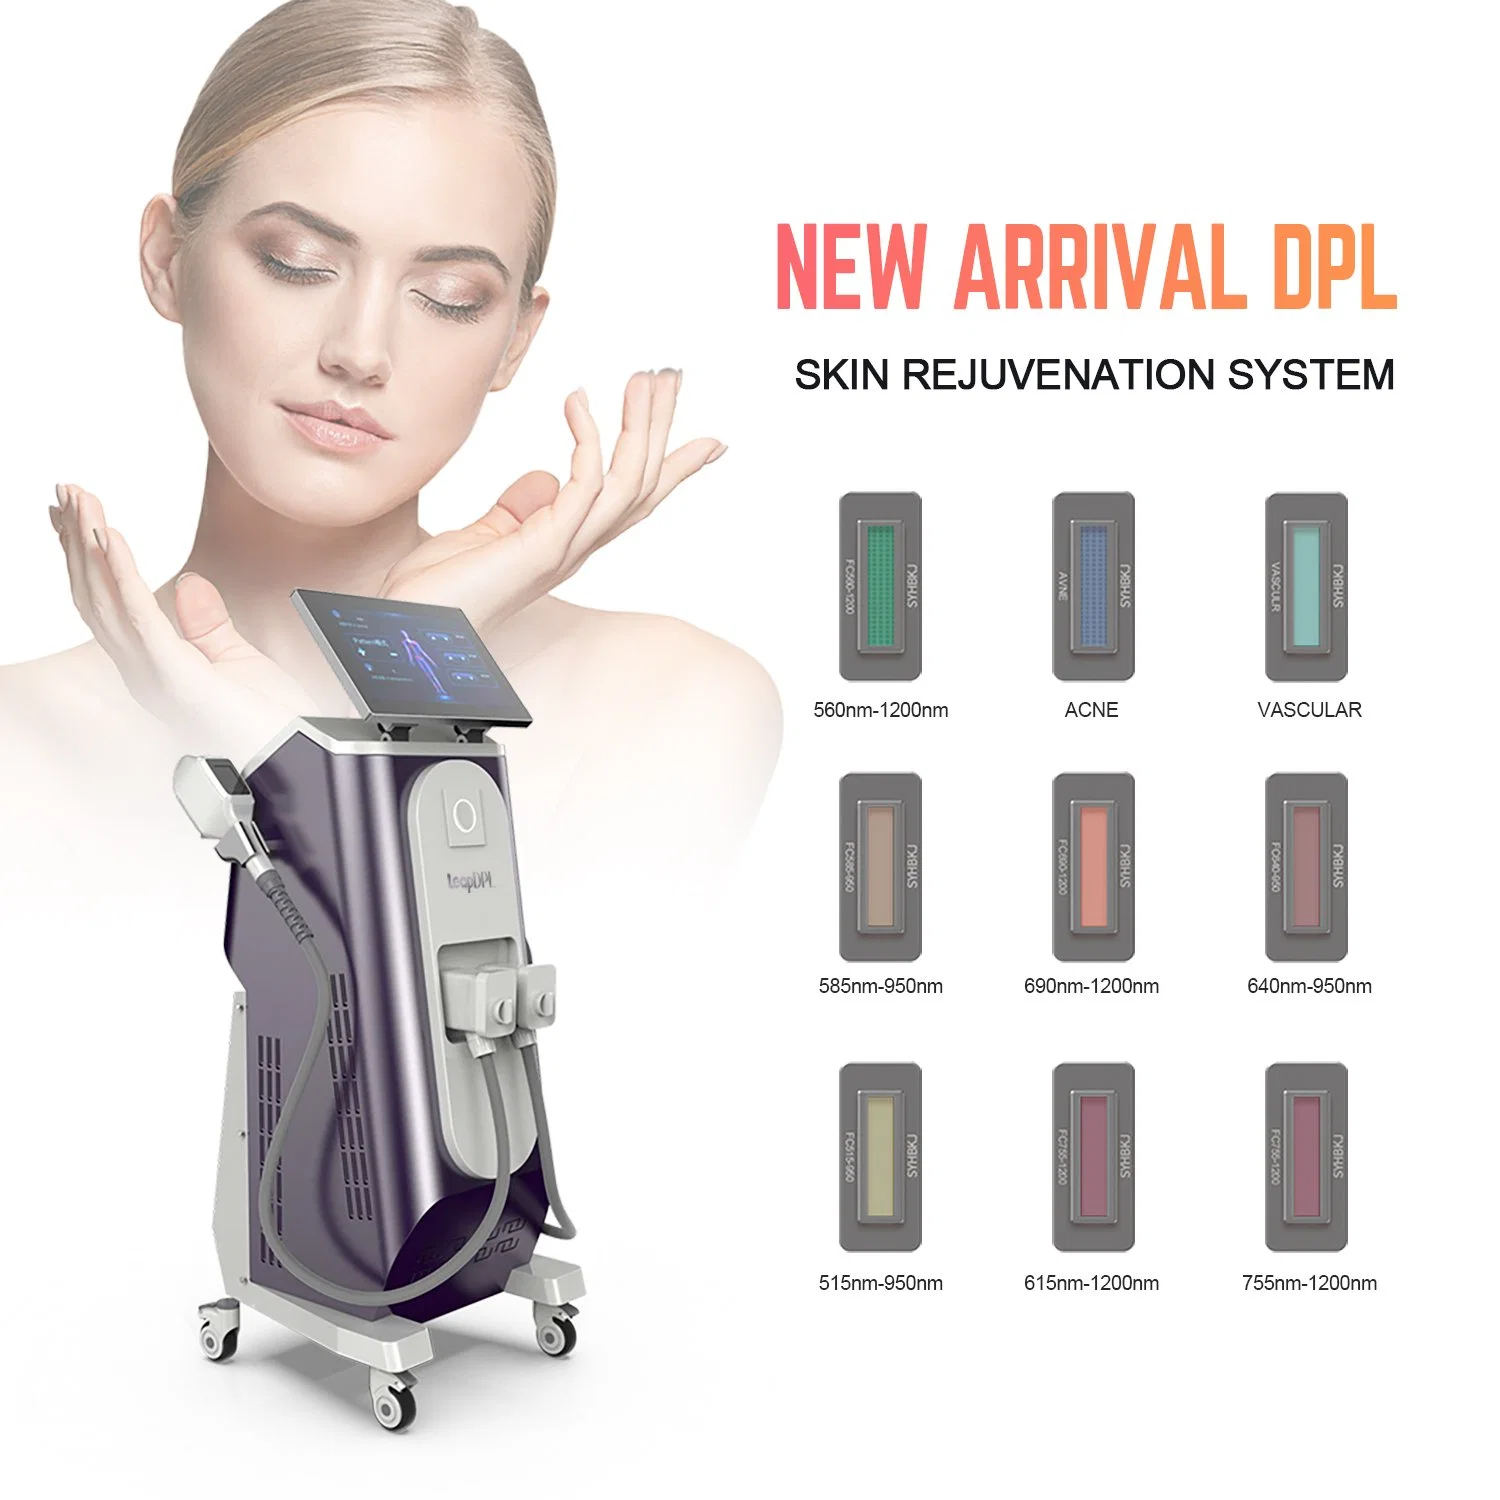 7 in 1 Opt IPL Dpl RF Q Switched ND YAG Diode Laser Hair Removal Multi Function SPA Supplies Beauty Equipment